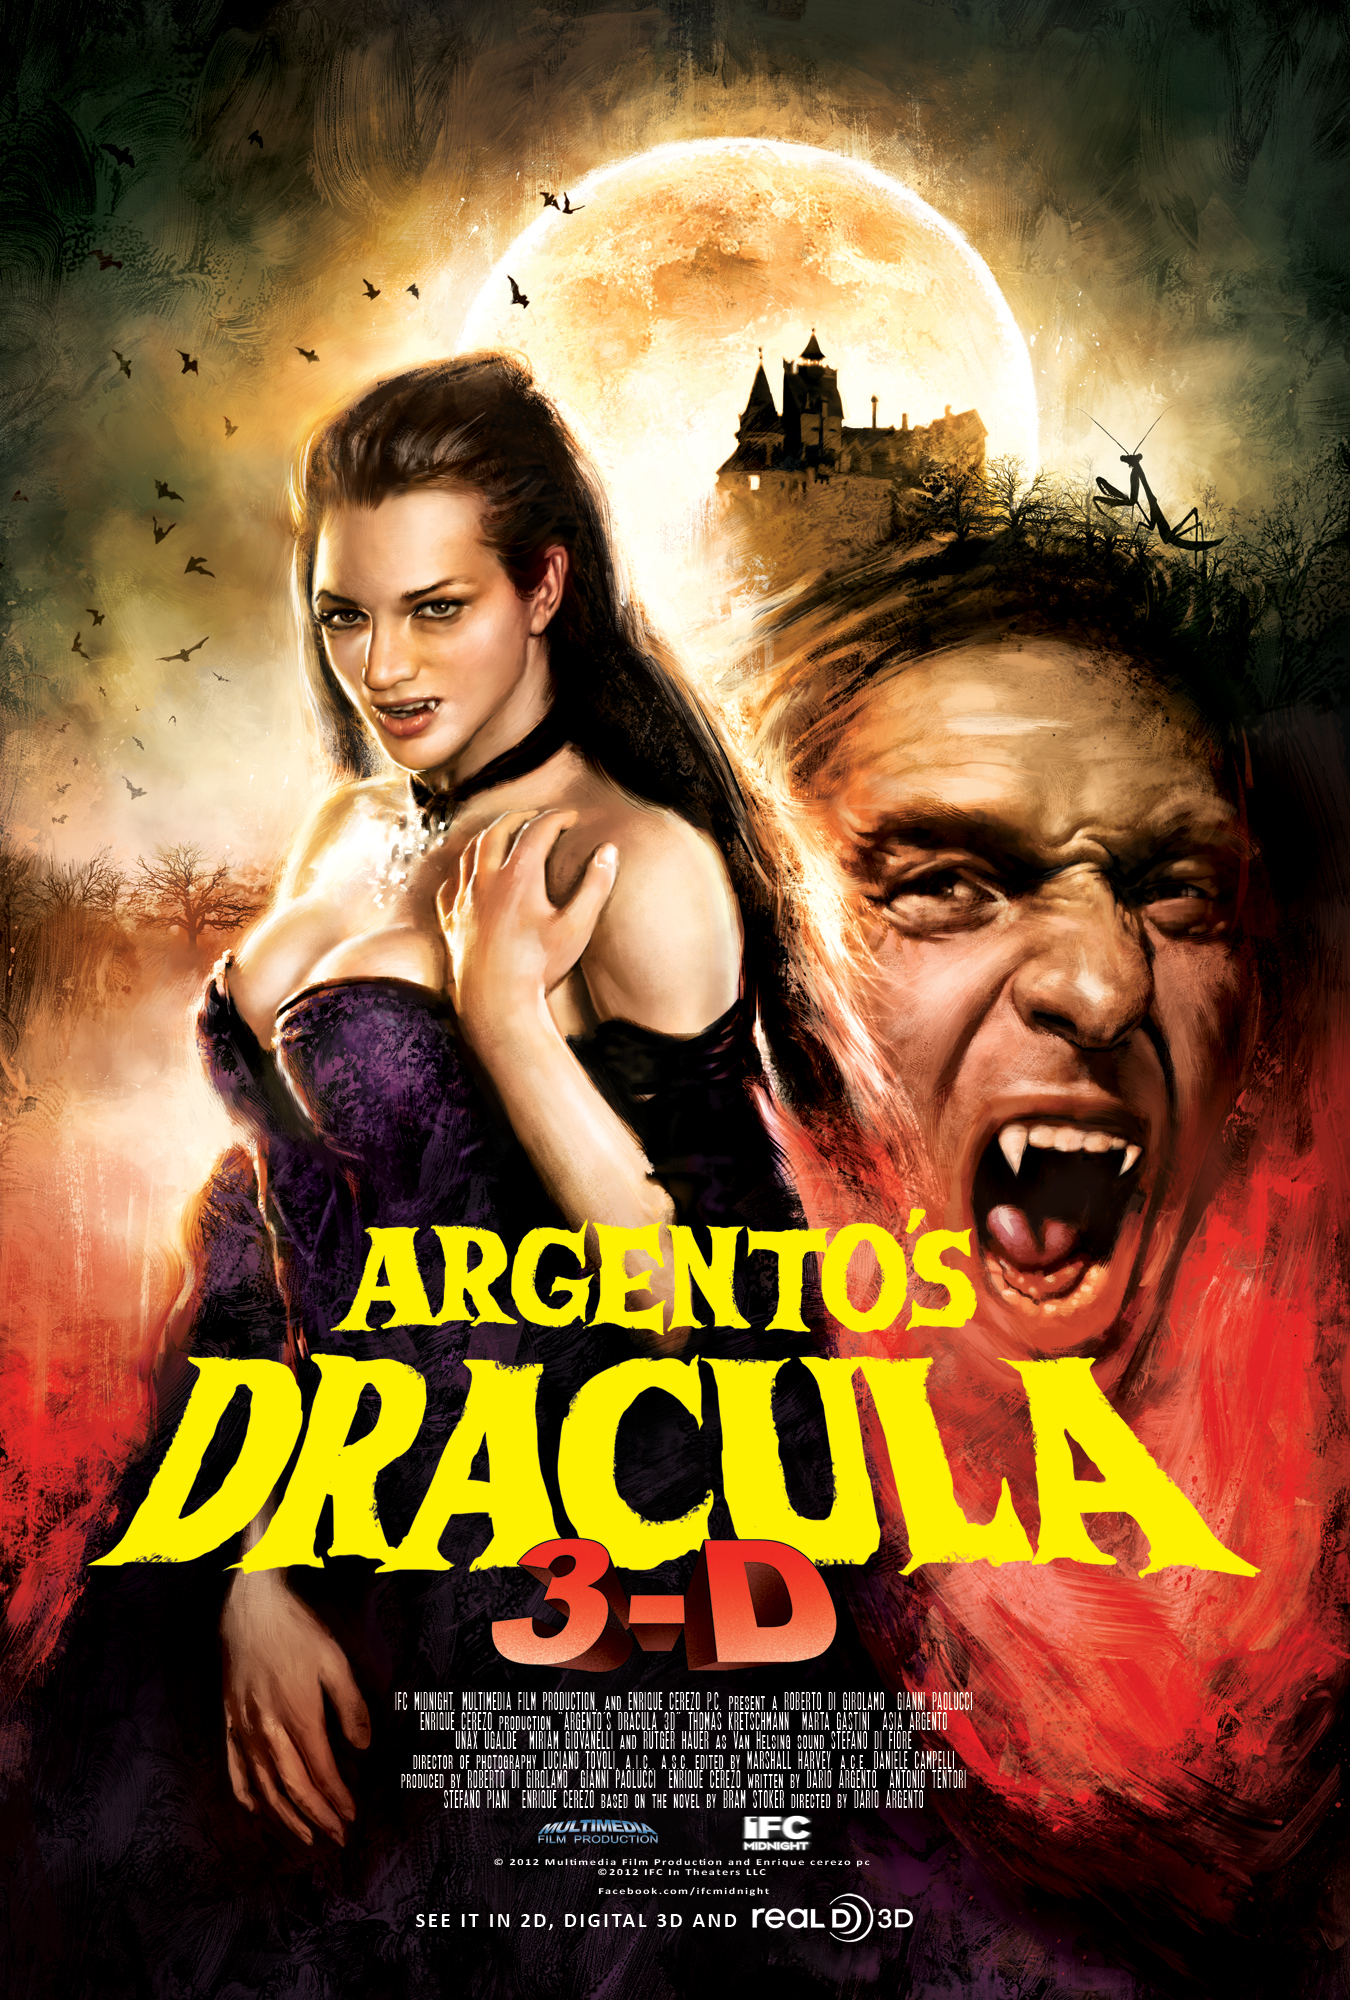 Argentos_Dracula_3D--poster_revised-9-9-2013-02000px